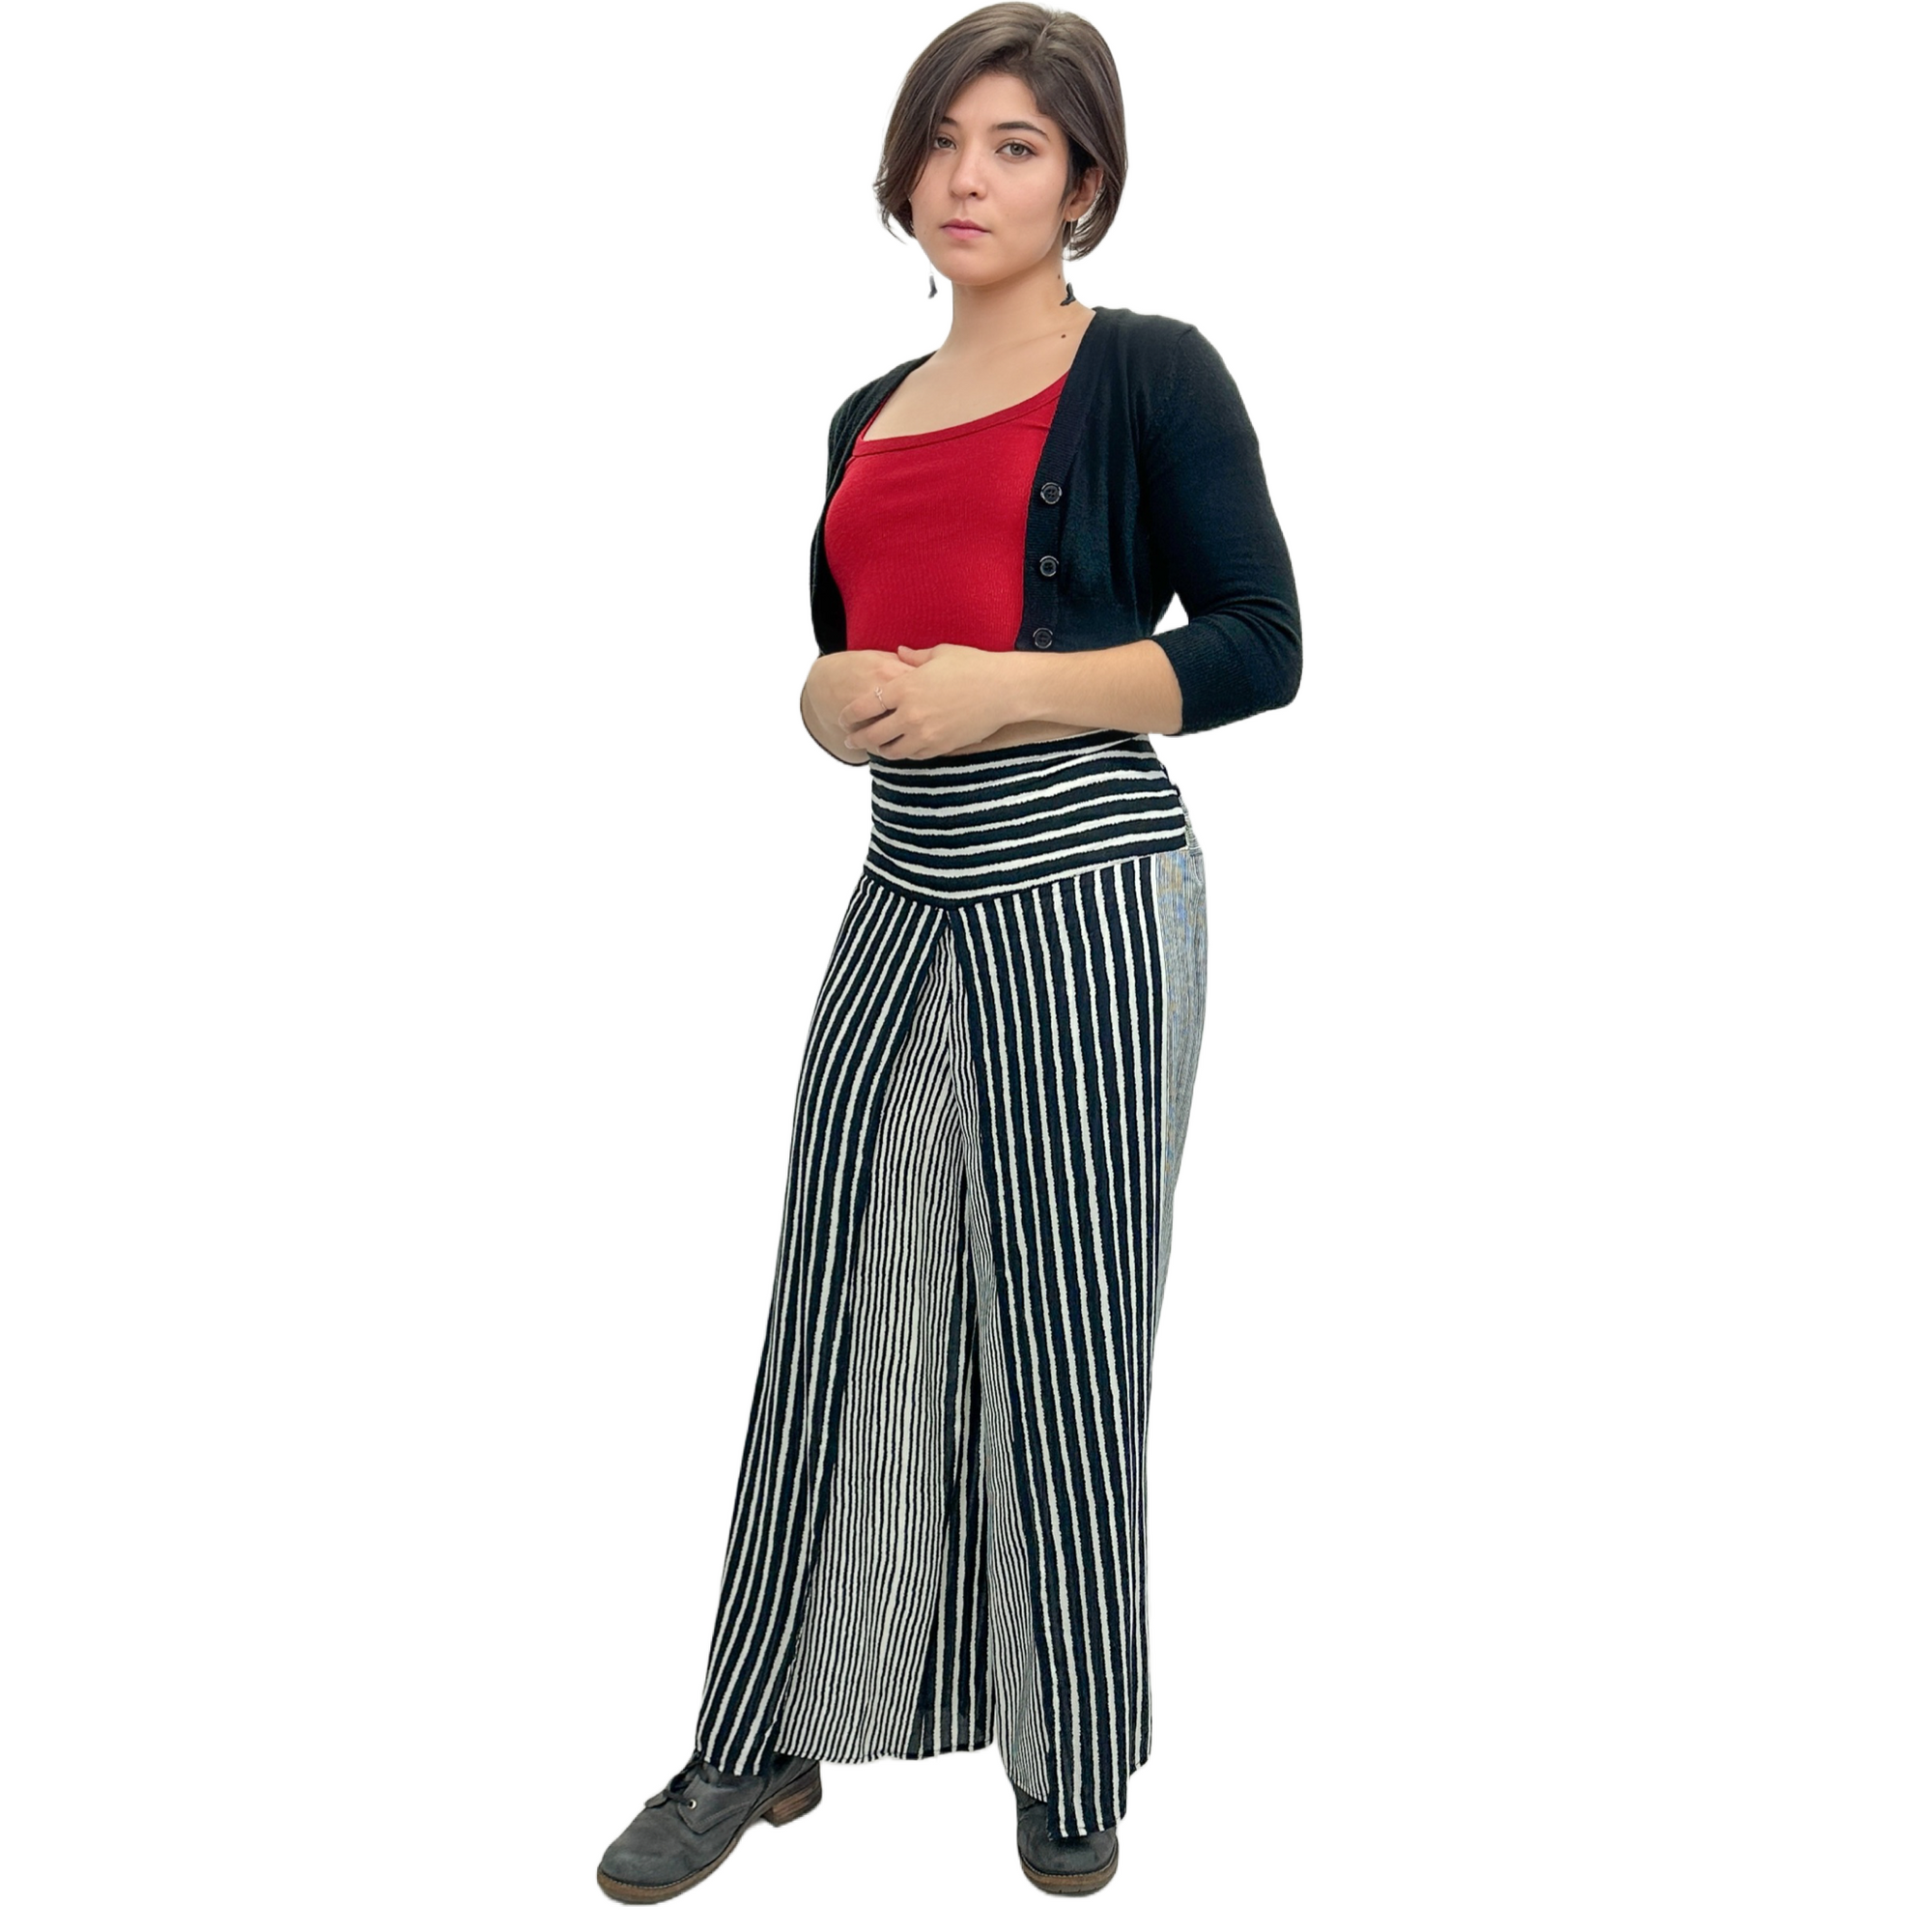 Black and white color stripe casual wide leg pants for women | filters sort summer | filter clearance - best price, best styles - shop now